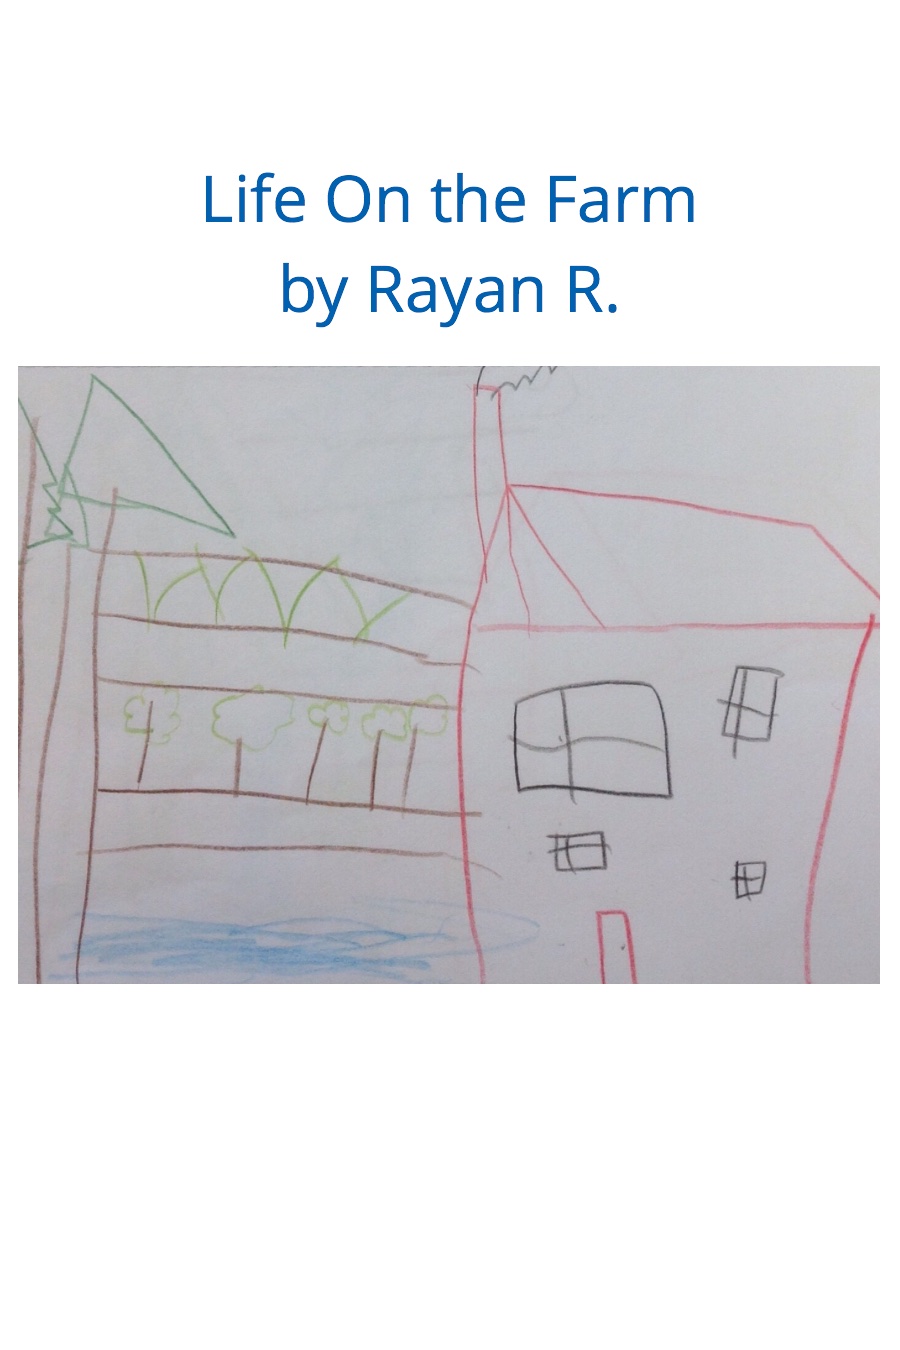 Life on the Farm by Rayan R